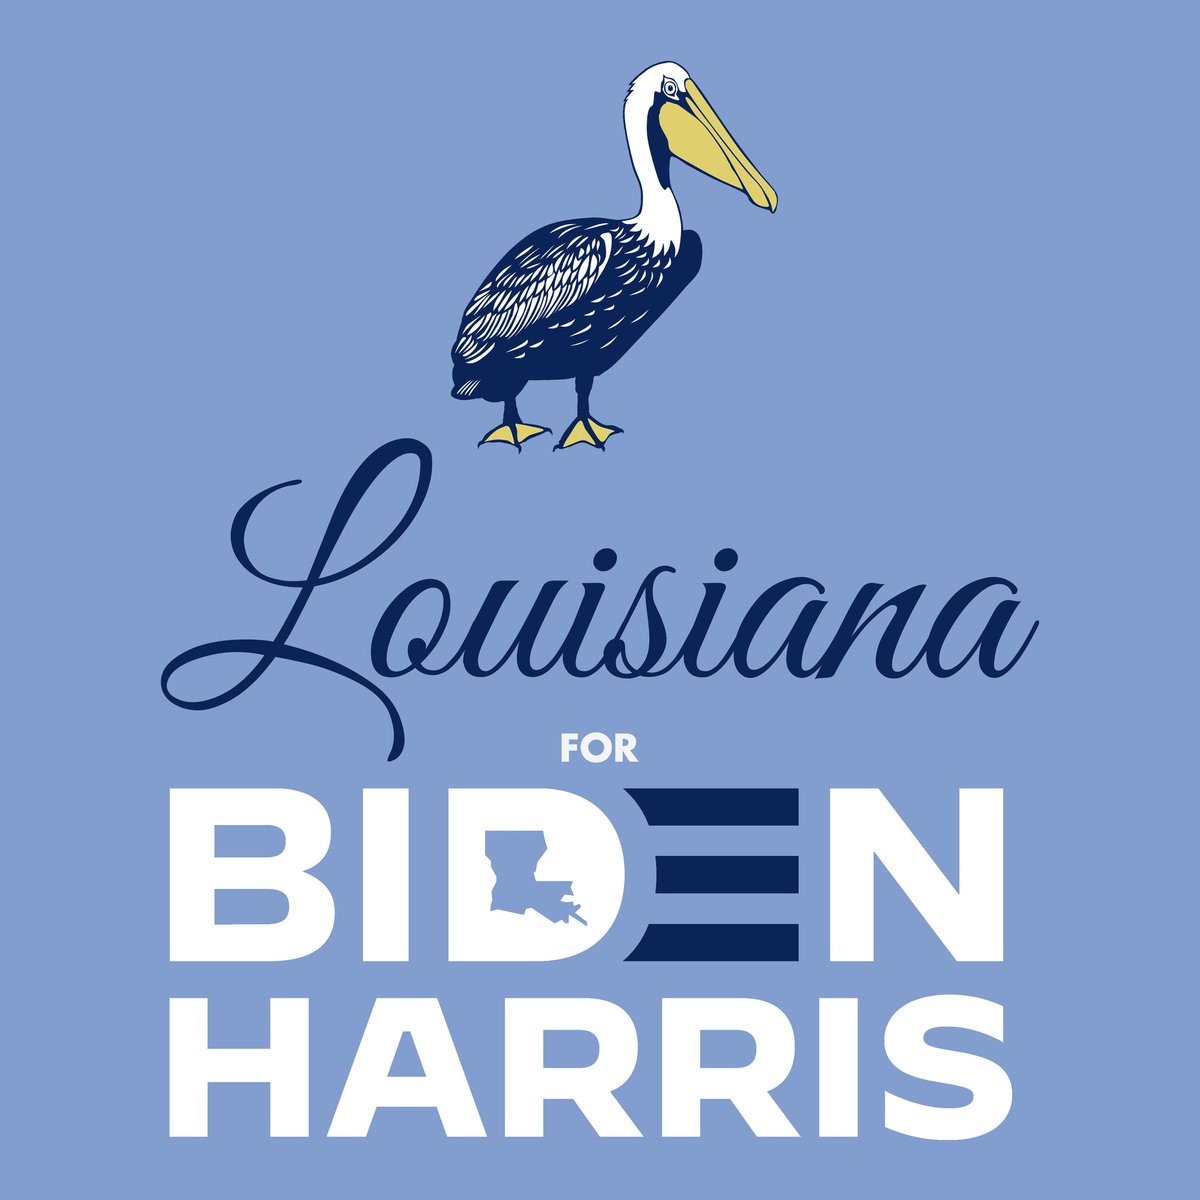 ICYMI my husband  @viva_verde is incredibly talented and made these beautiful state coalition graphics for  #BidenHarris supporters. More otw and he takes requests for priority! RT your state if you're  #RidinWithBidenHarris 3/8  #Indiana  #Kansas  #Louisiana  #Maine